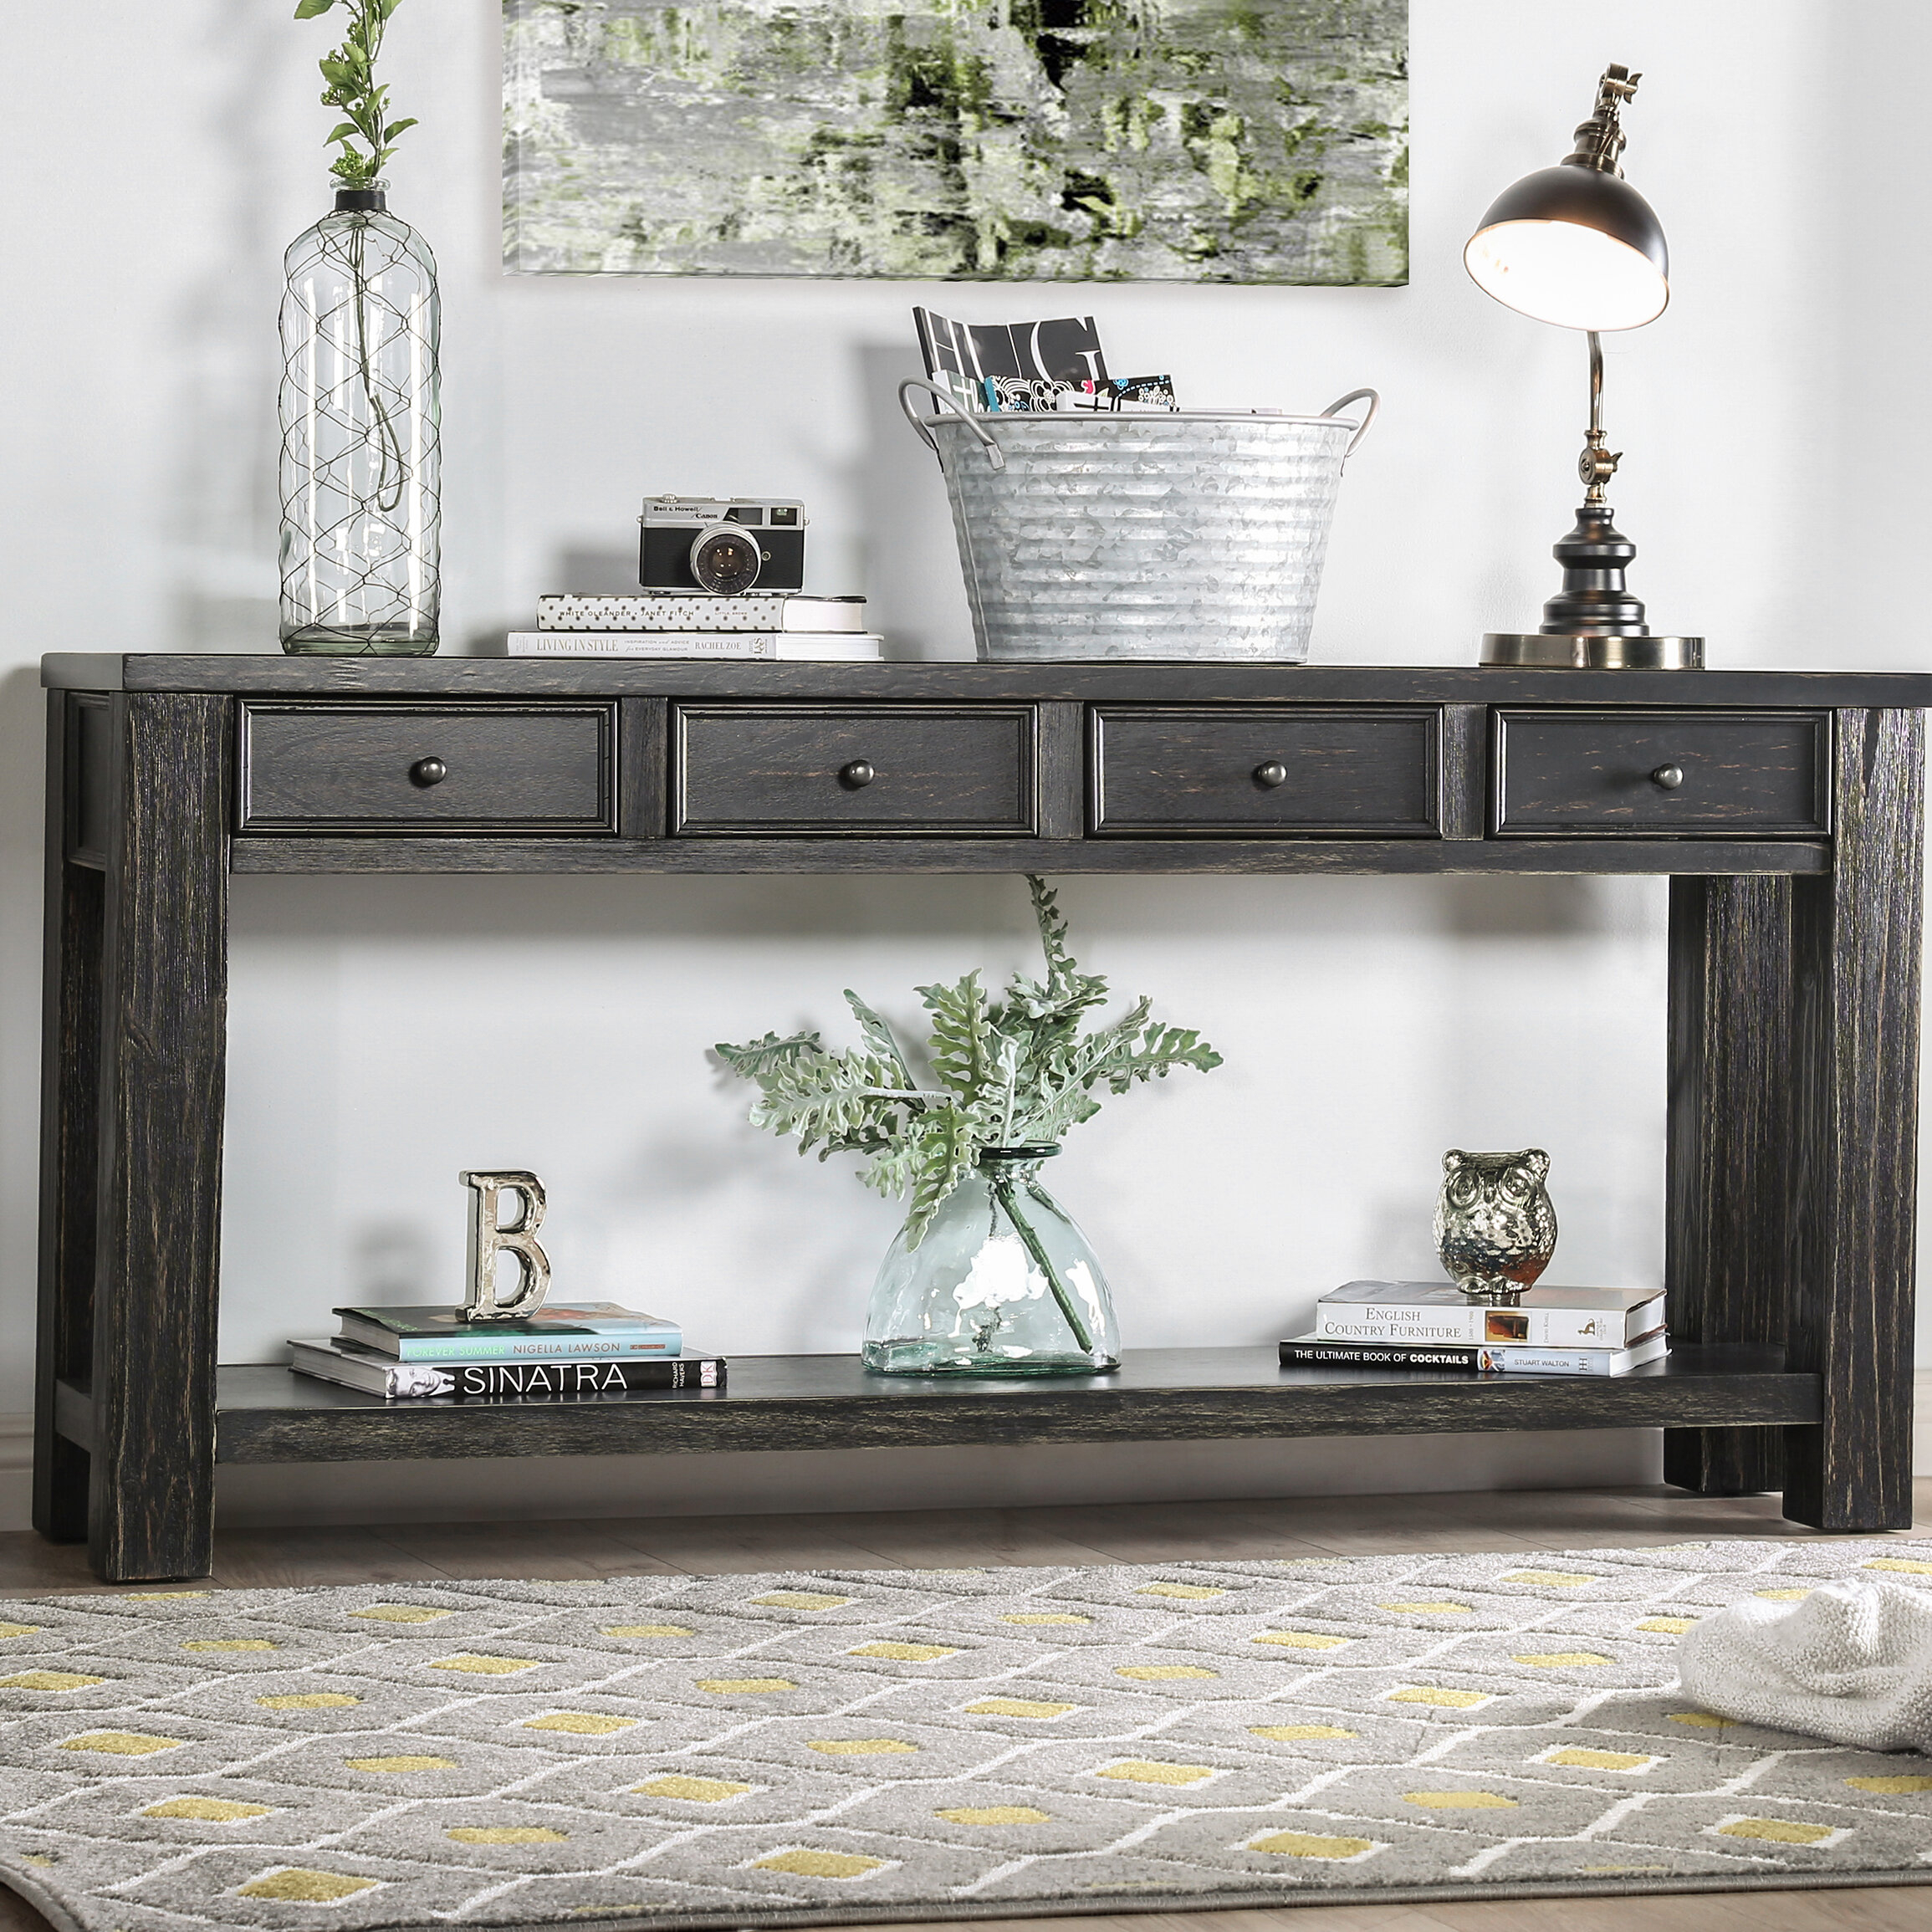 Extra Long Console Table Visualhunt, Extra Long Skinny Console Table